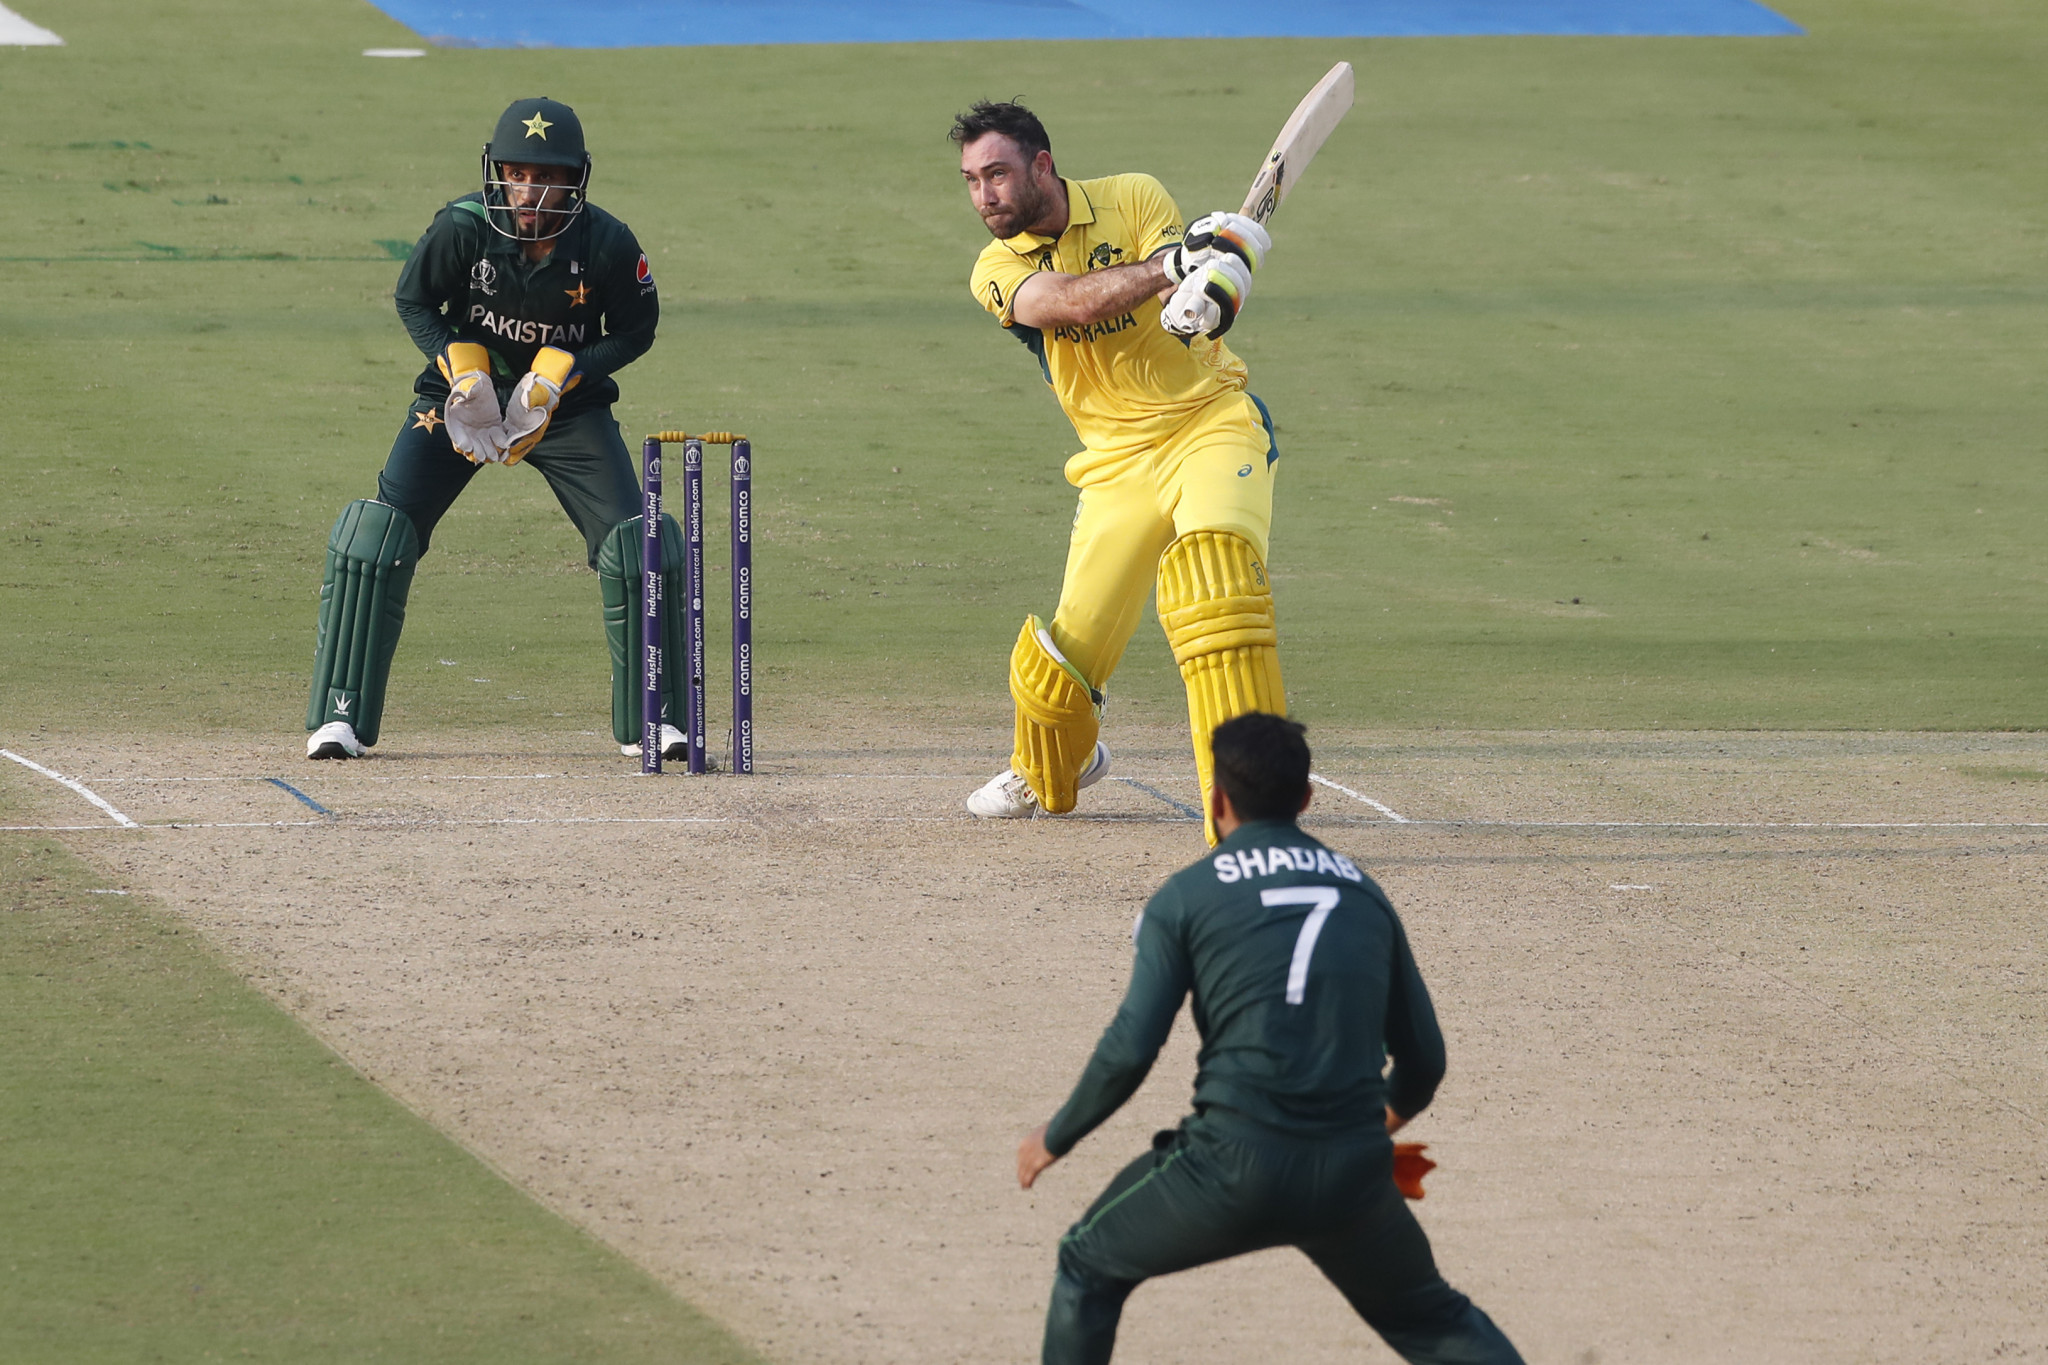 Glenn Maxwell struck 77 for five-time World Cup winners Australia in their final warm up match against Pakistan ©Getty Images